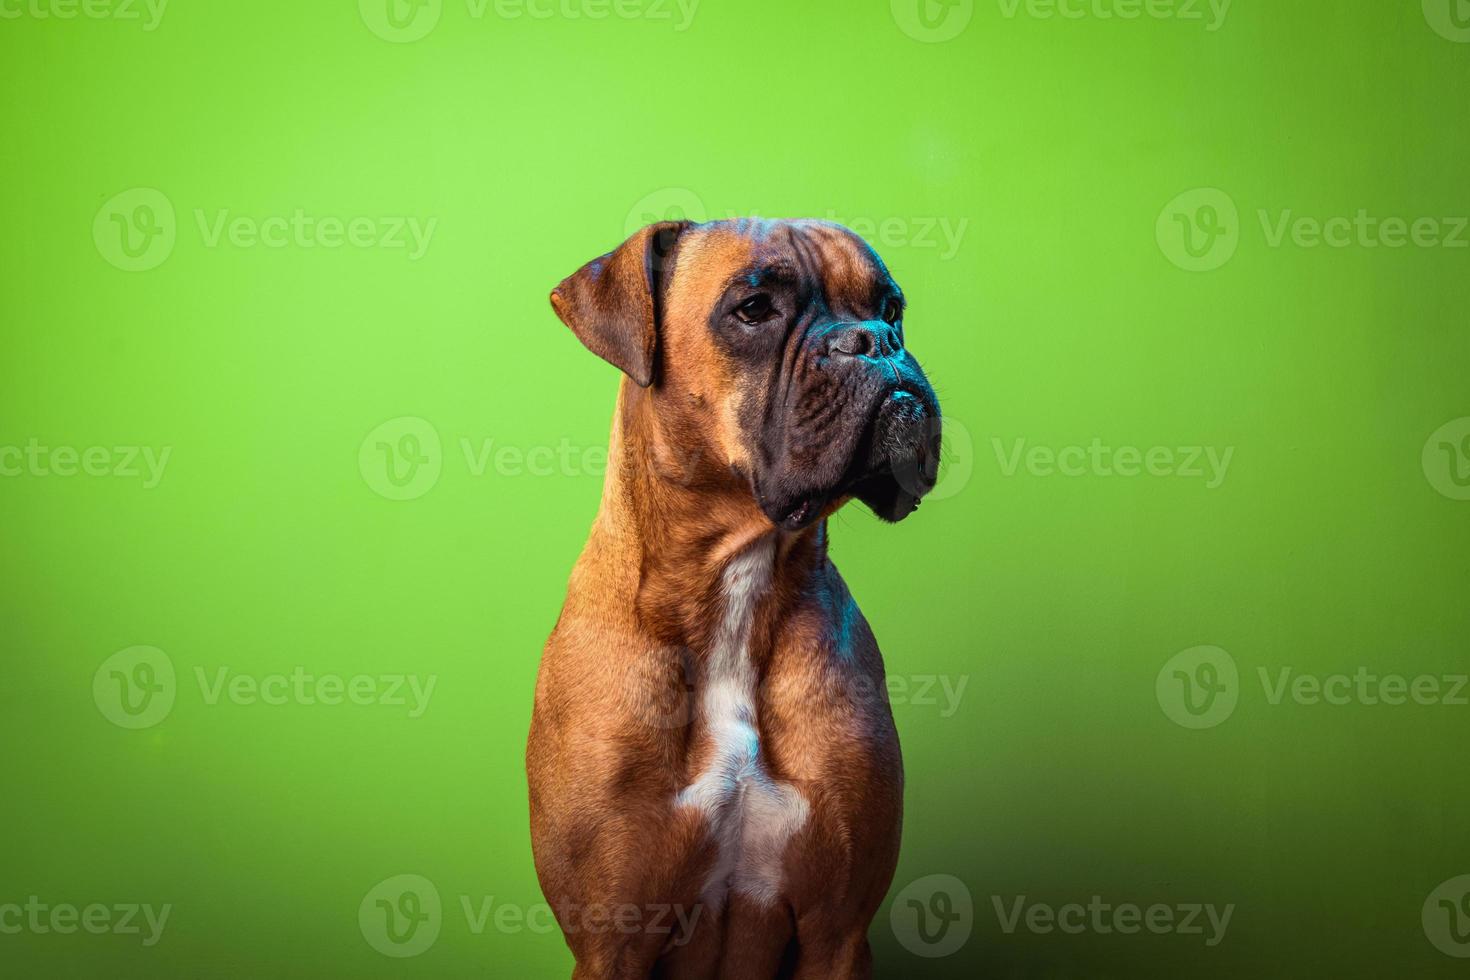 Portrait of cute boxer dog on colorful backgrounds, green photo